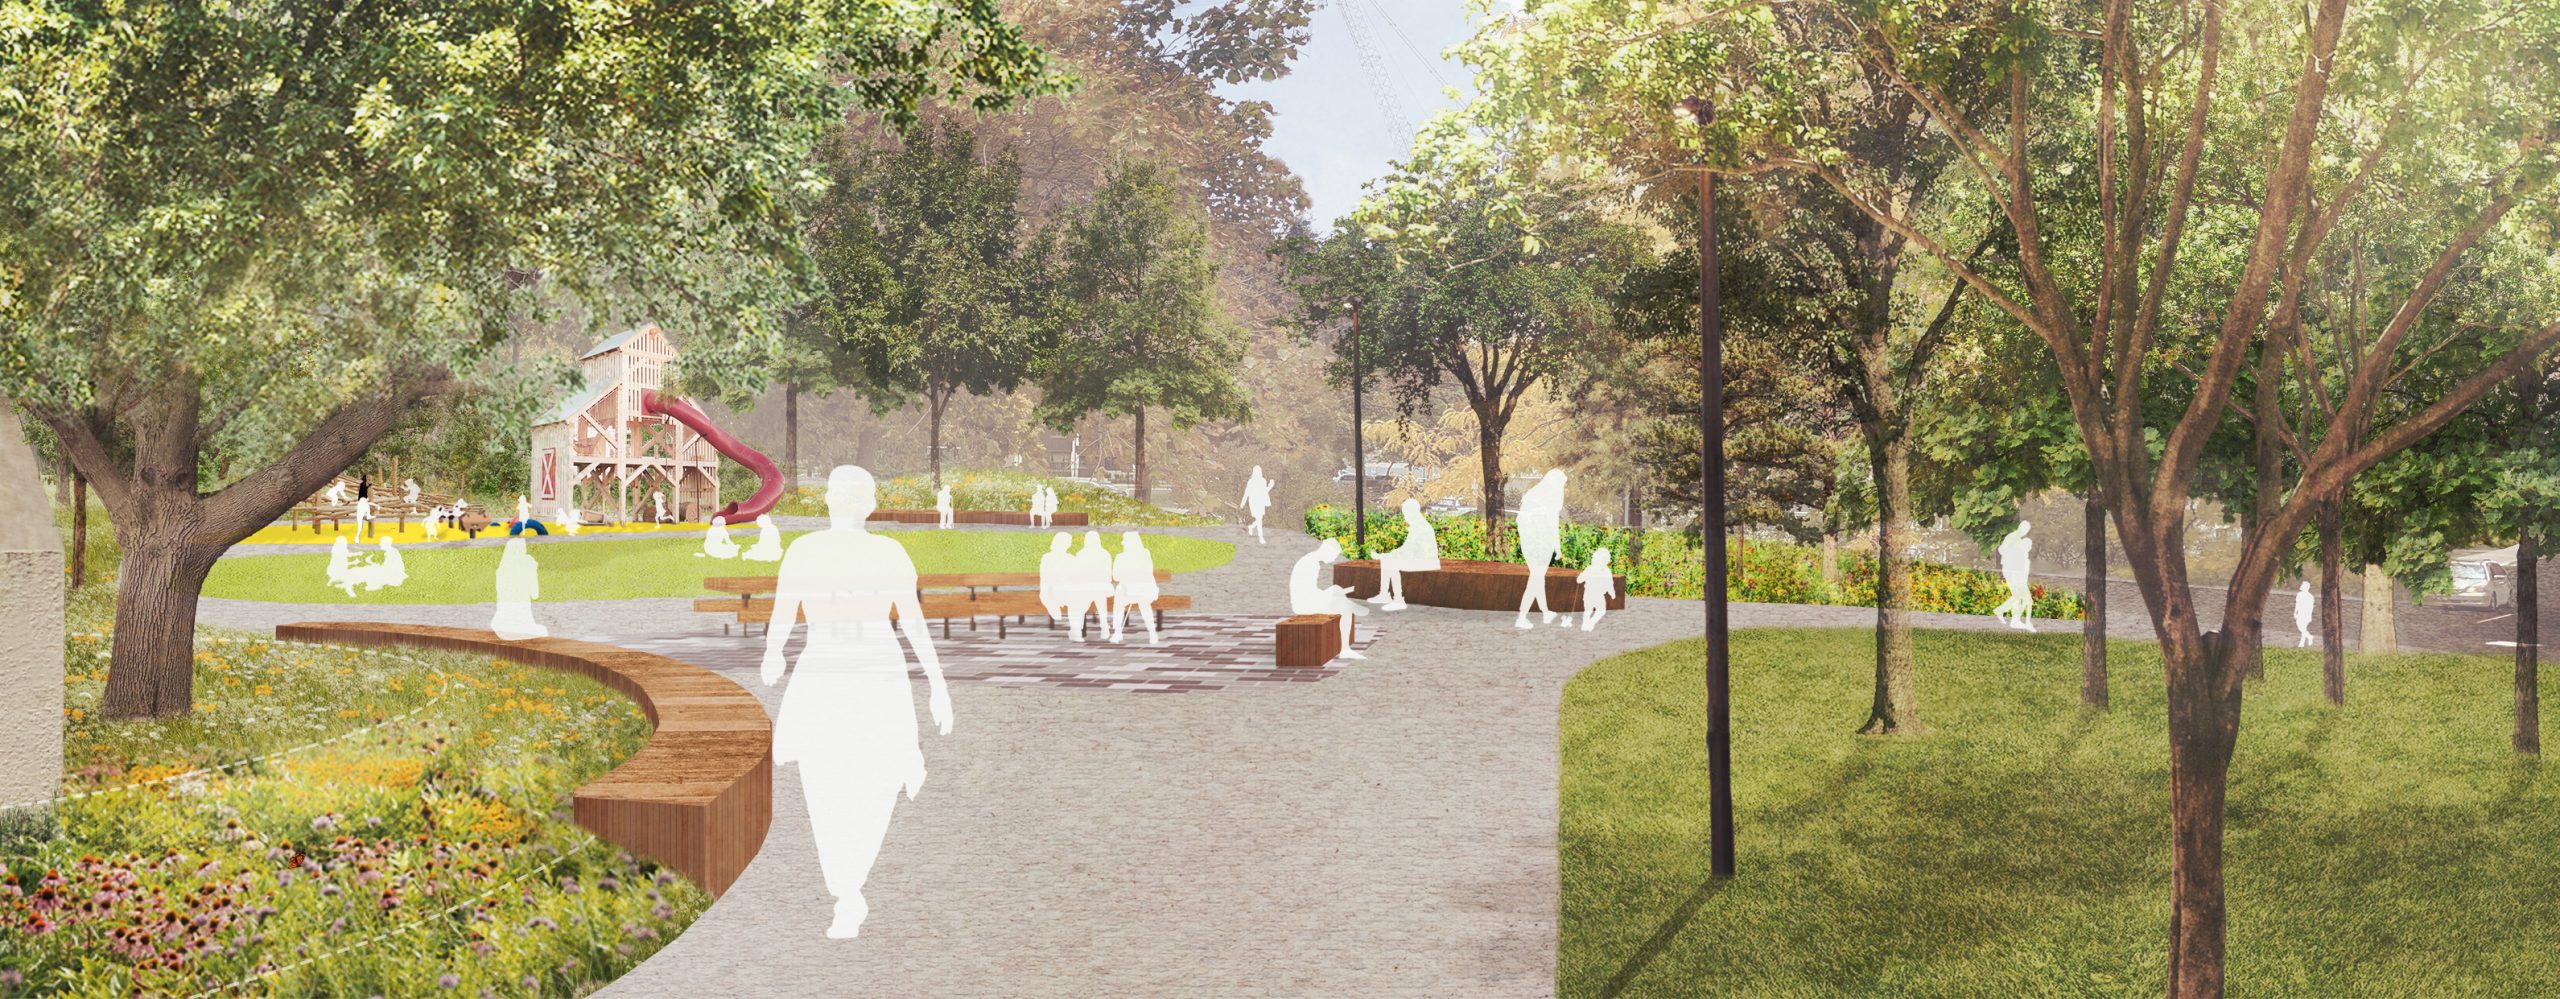 Illustrative image showing the parkette entrance from the north, looking southeast through the parkette. A seat wall in the foreground wraps around a green space with a tree and meadow plantings. Further into the distance, people are sitting on platforms, benches, and picnic tables.